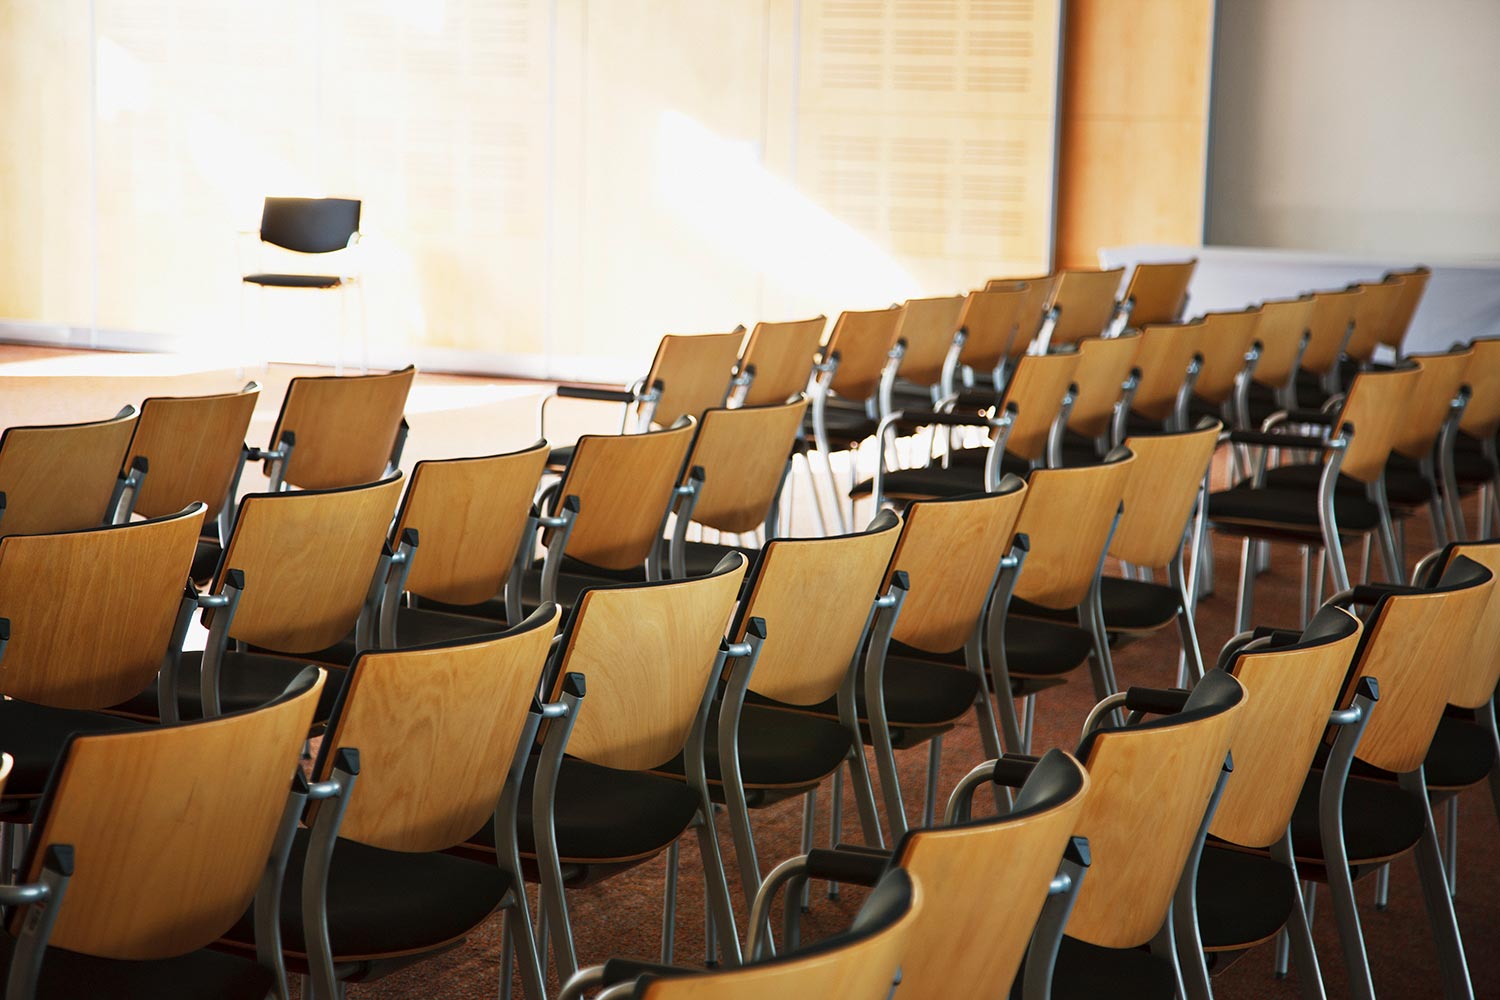 Empty chairs lined up for seminar